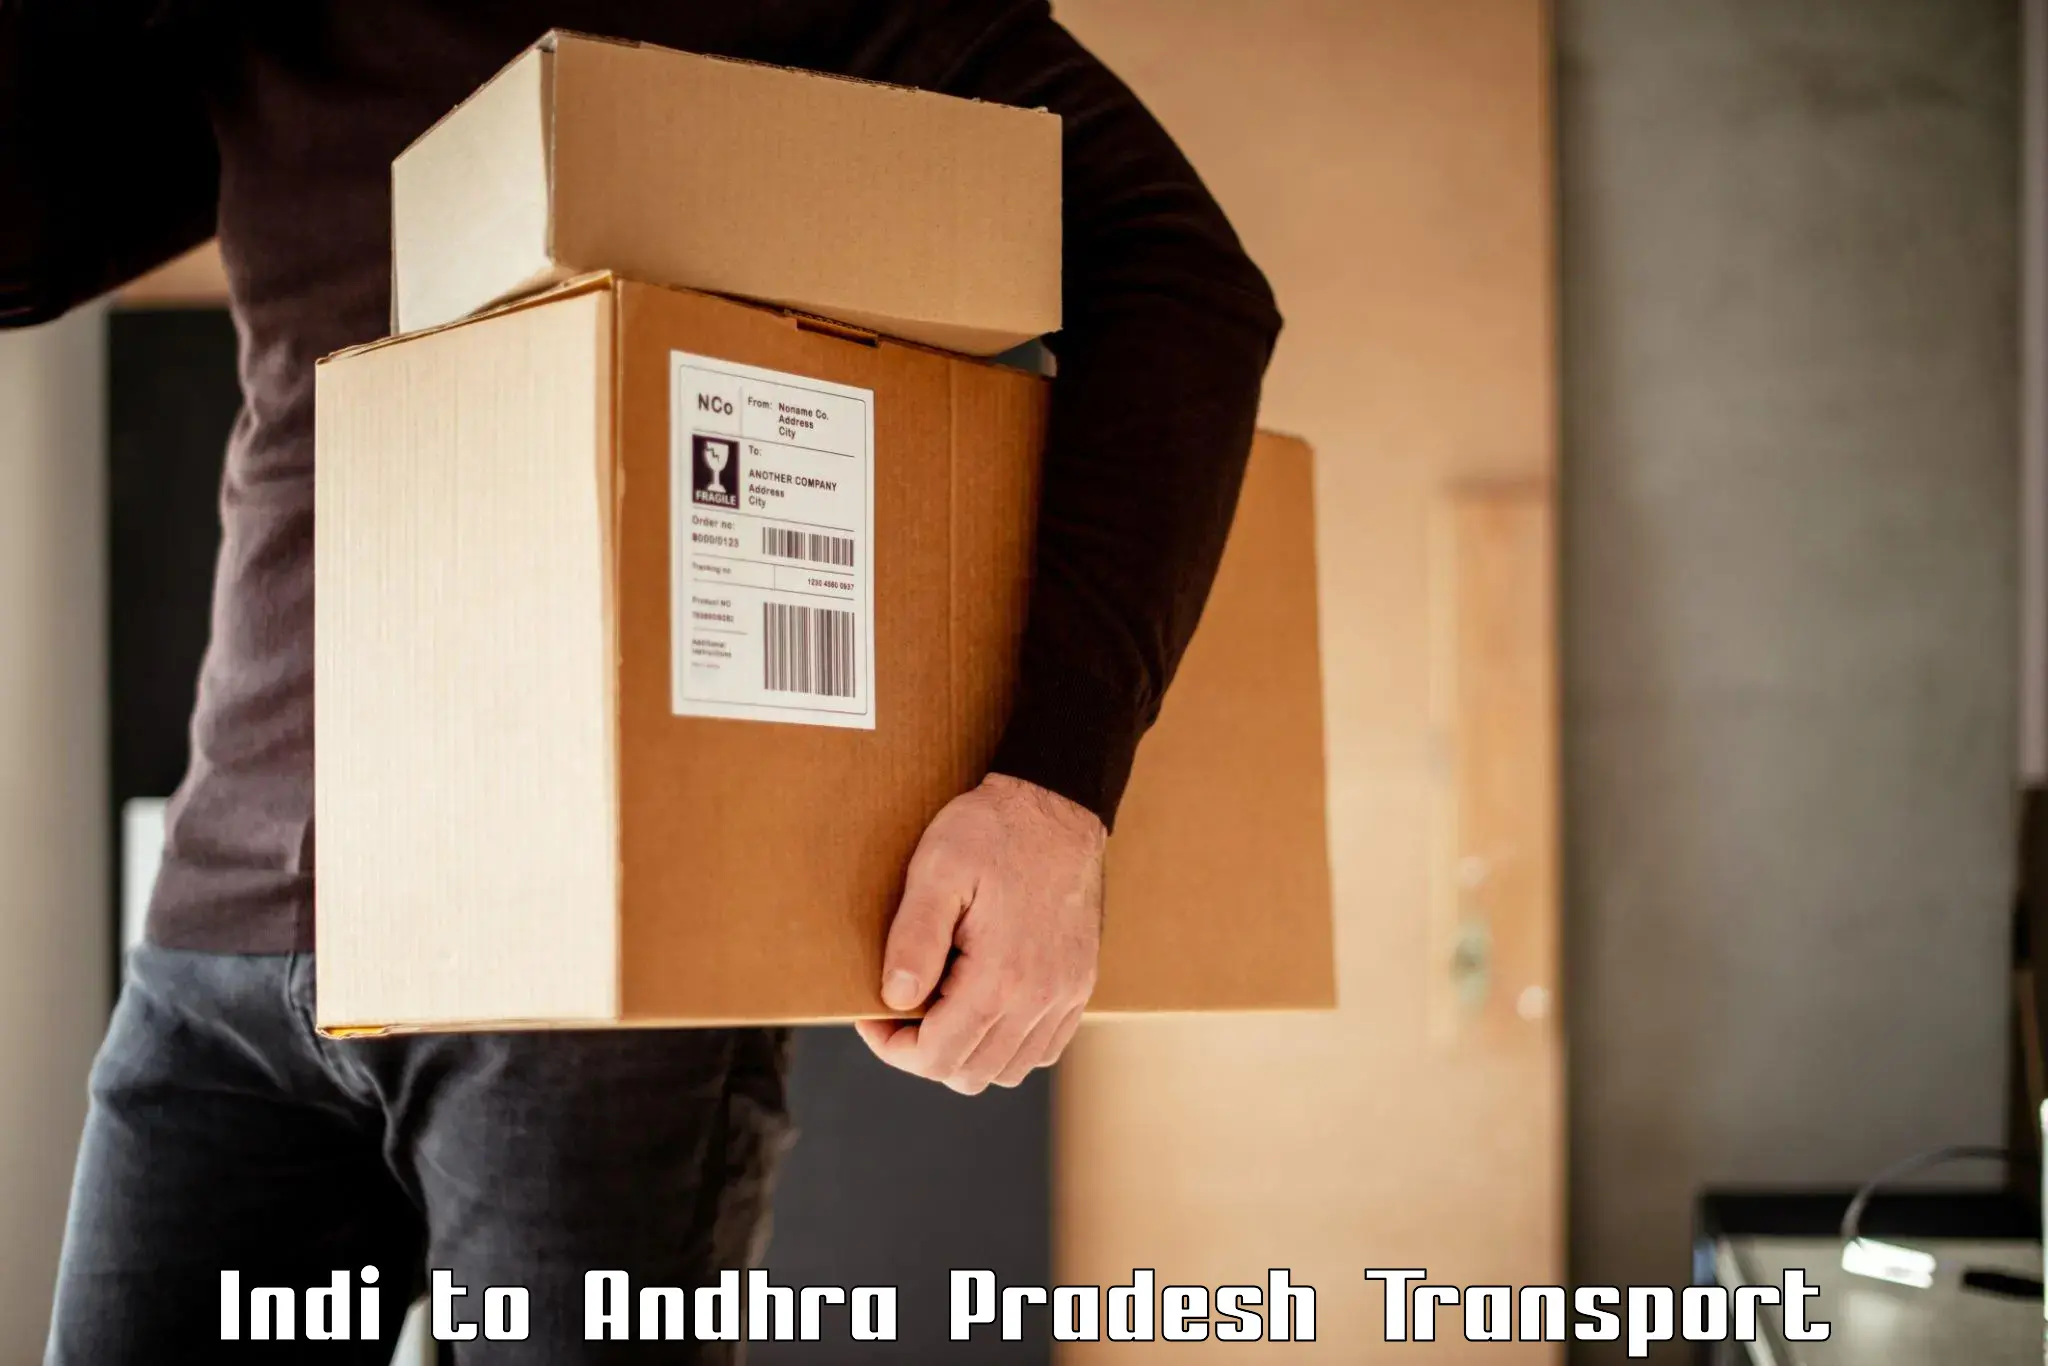 Transport bike from one state to another Indi to Andhra Pradesh